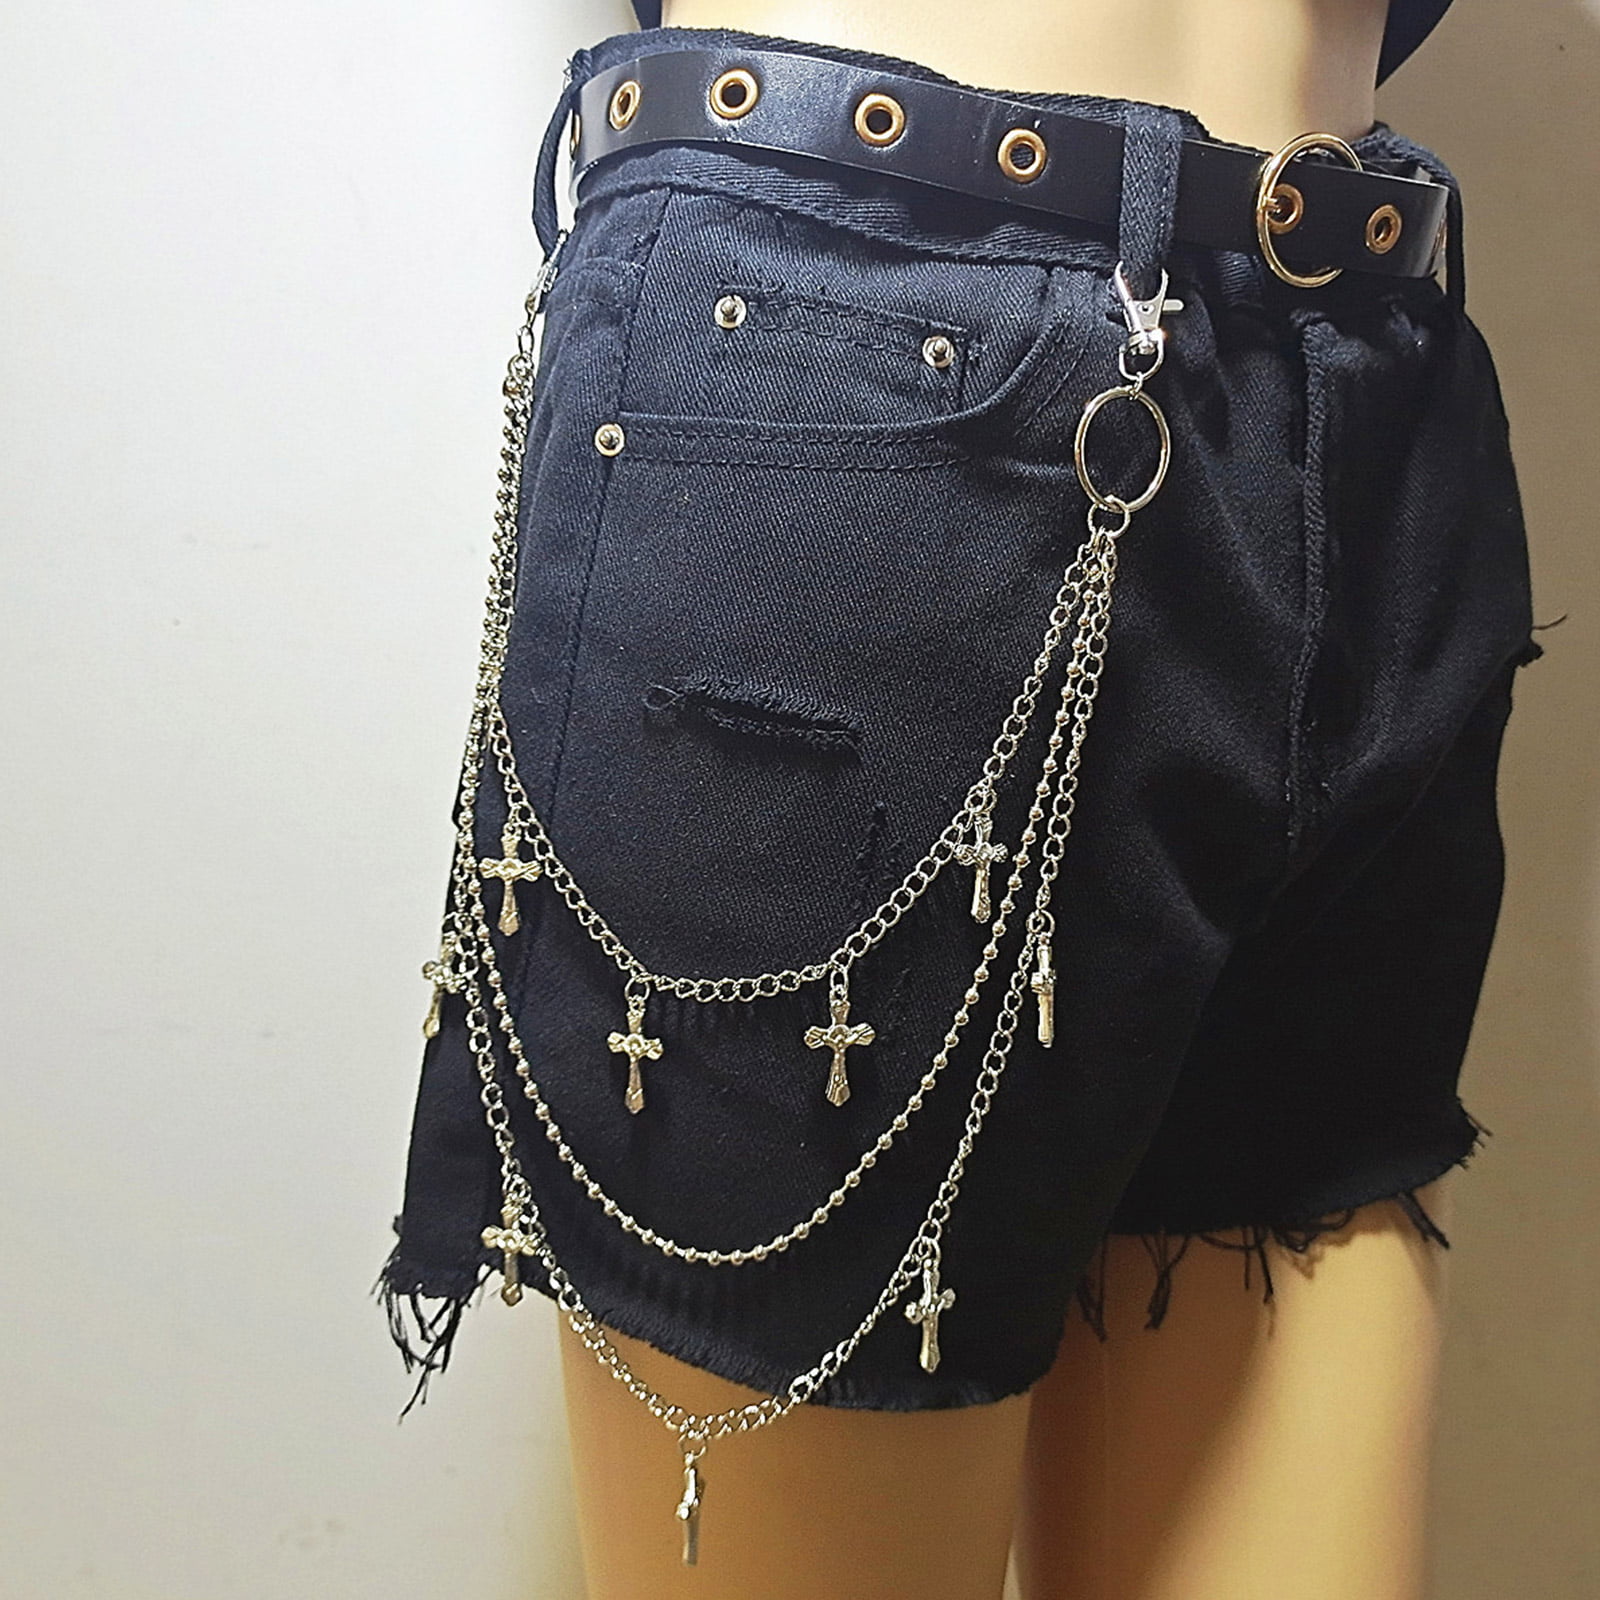 Pants Chain With Star For Cross Shape Decor Wallet Jeans Pocket Chains Rock  Style